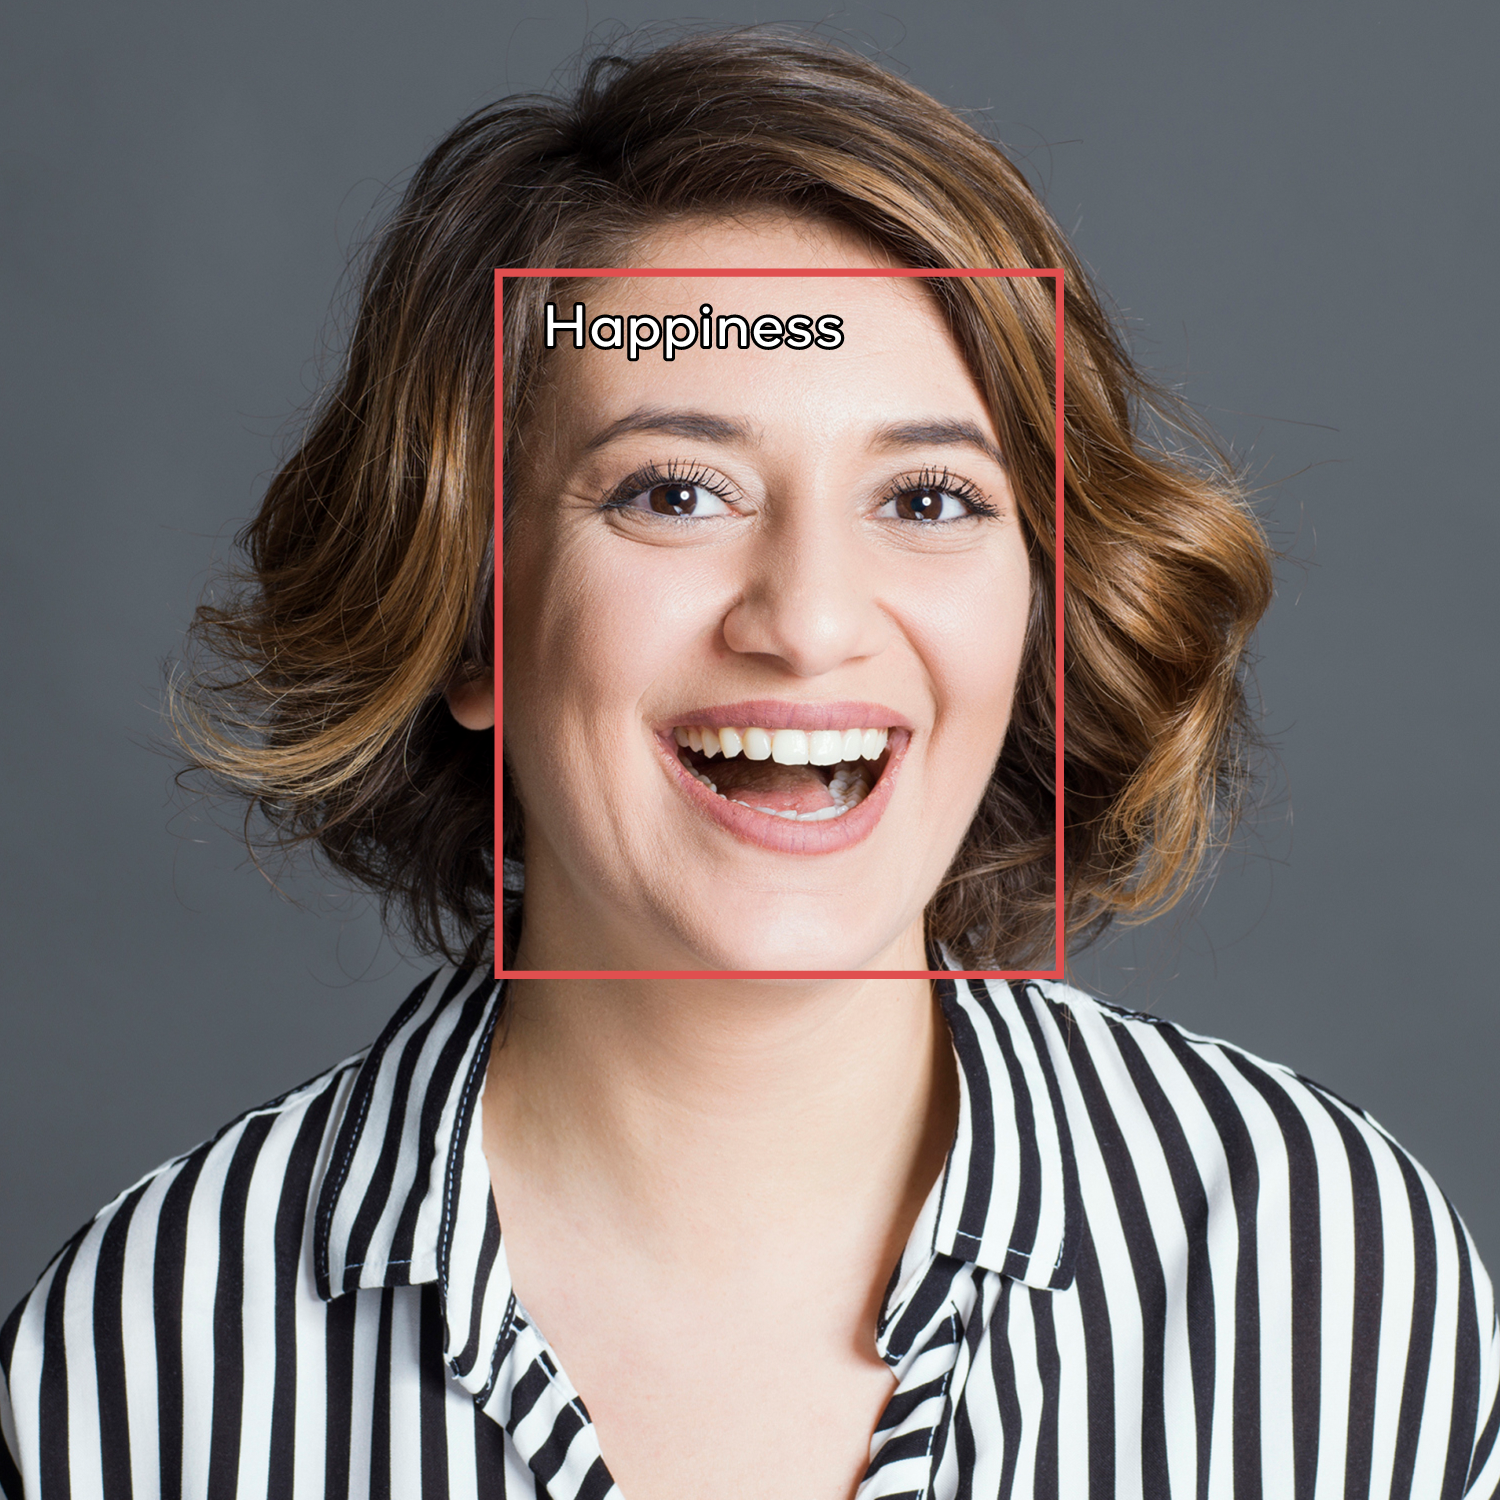 Facial Expression Detection - Happiness